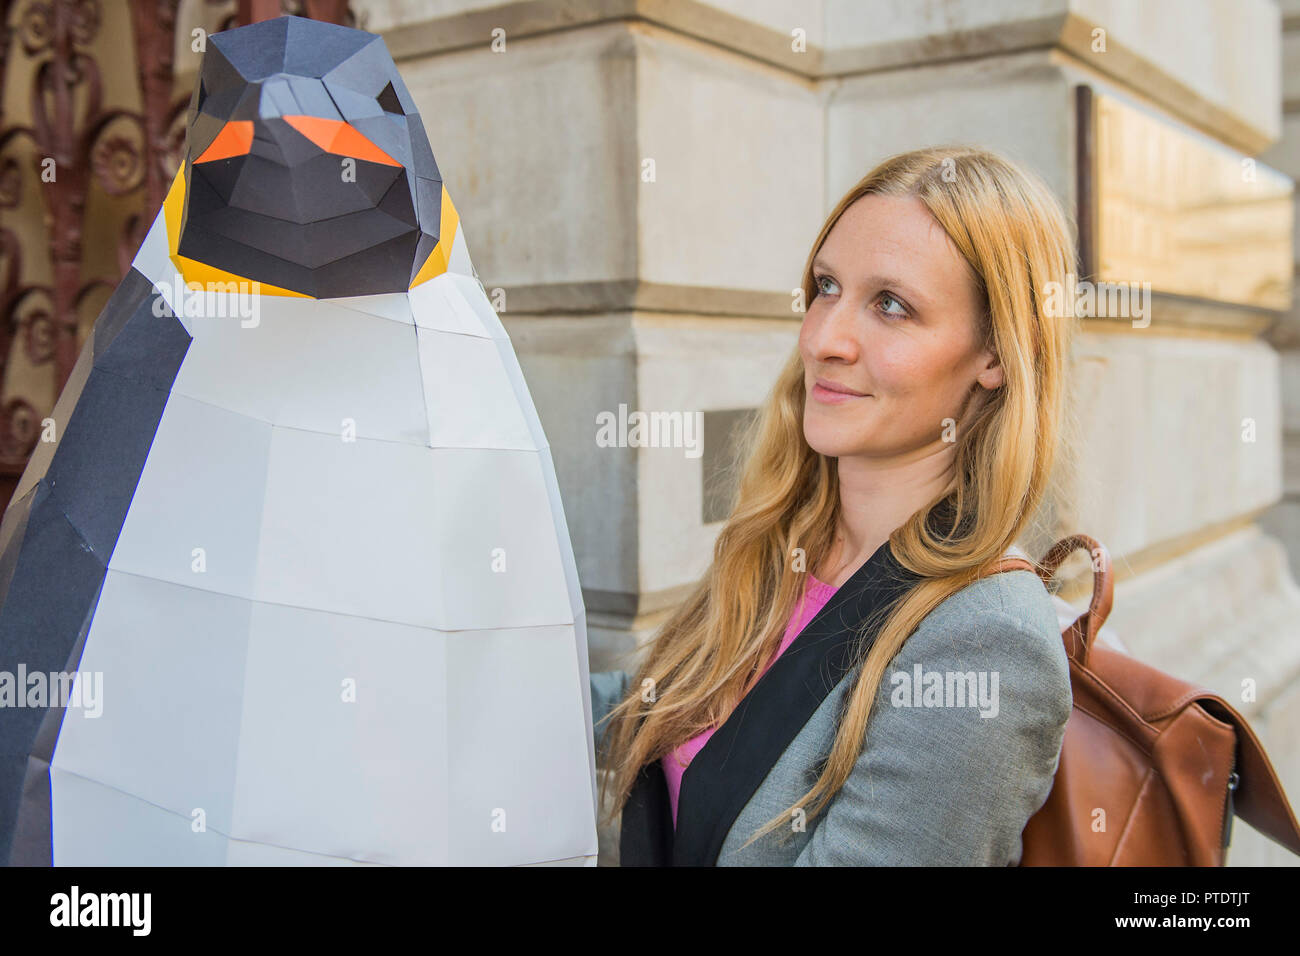 London, UK. 9th October, 2018. A Greenpeace spokesperson carries the penguin in to security - Gillian Anderson, Greenpeace Antarctic Ambassador, visits the Foreign & Commonwealth Office to deliver a petition calling for the creation of the largest protected area on Earth – a 1.8 million square kilometre Antarctic Ocean Sanctuary. Credit: Guy Bell/Alamy Live News Stock Photo